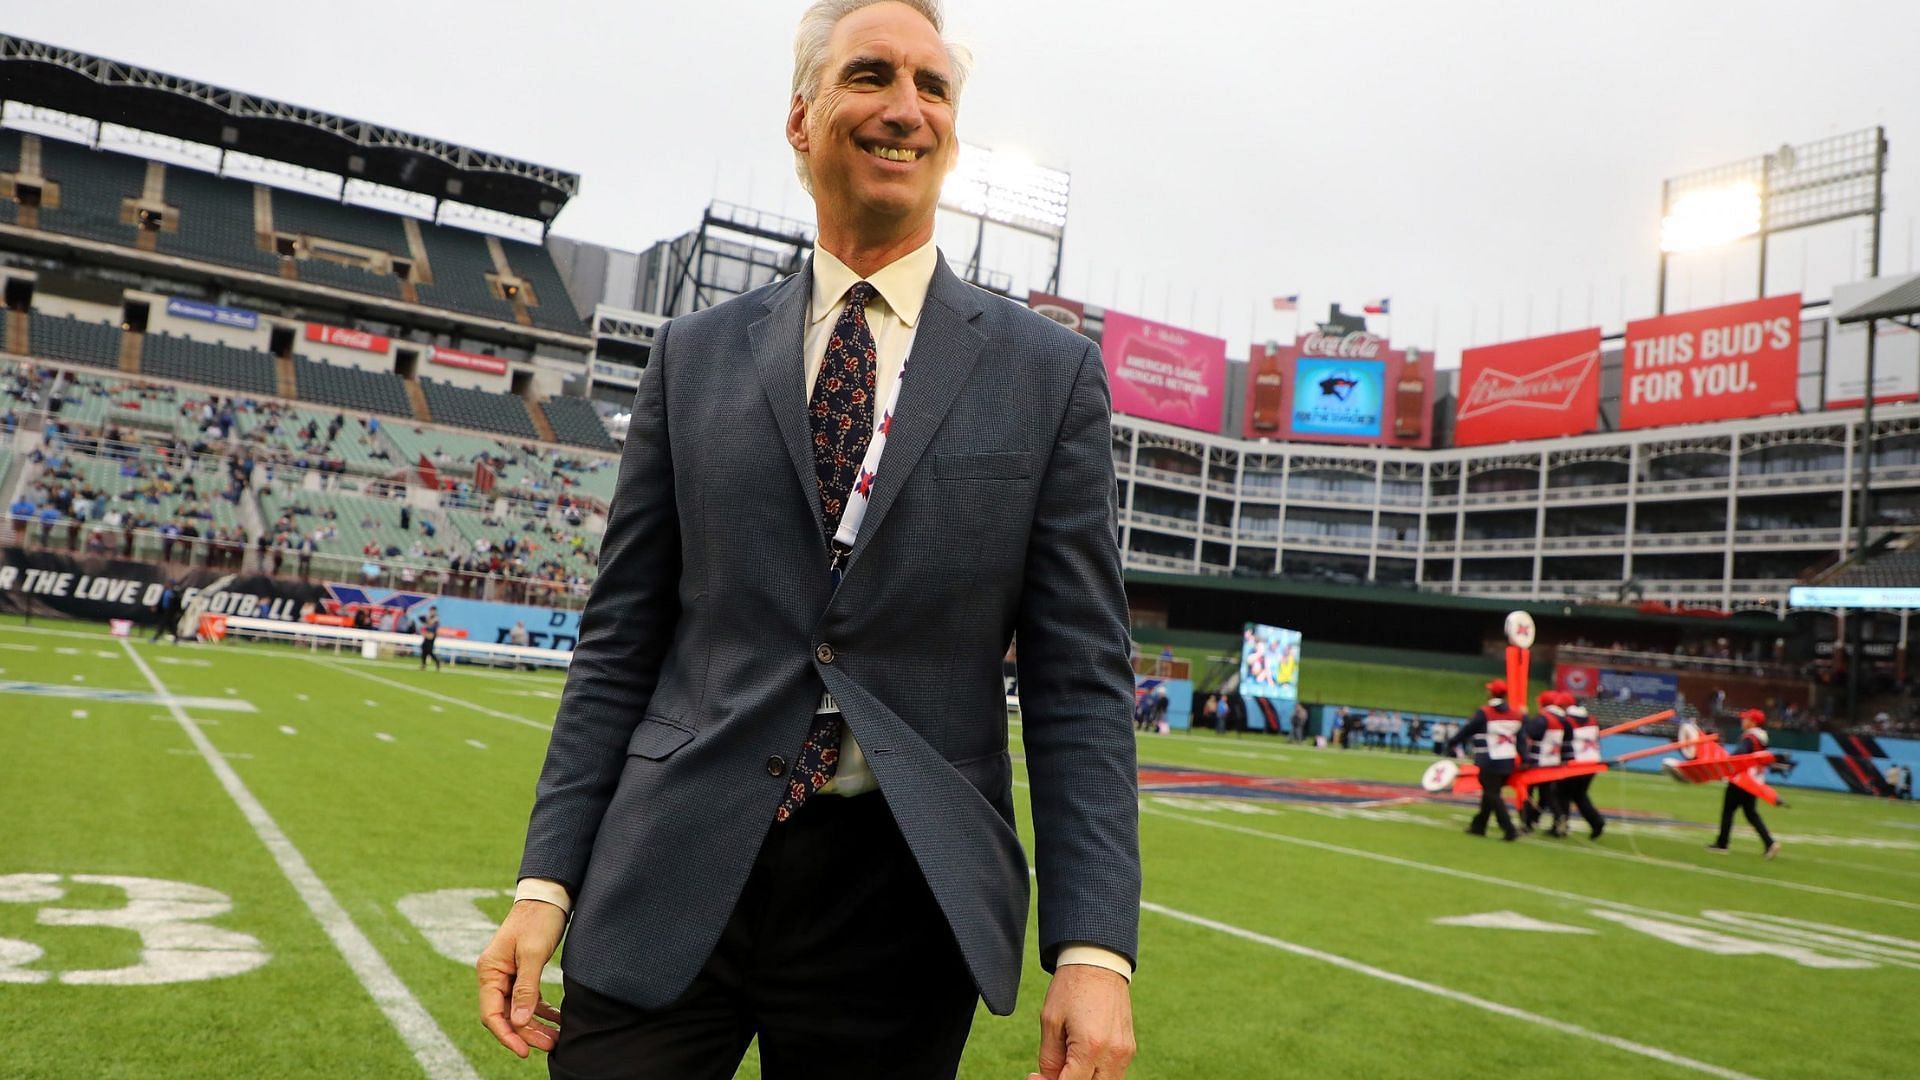 Can Oliver Luck figure out how to get a Pac-12 AAC superconference done?